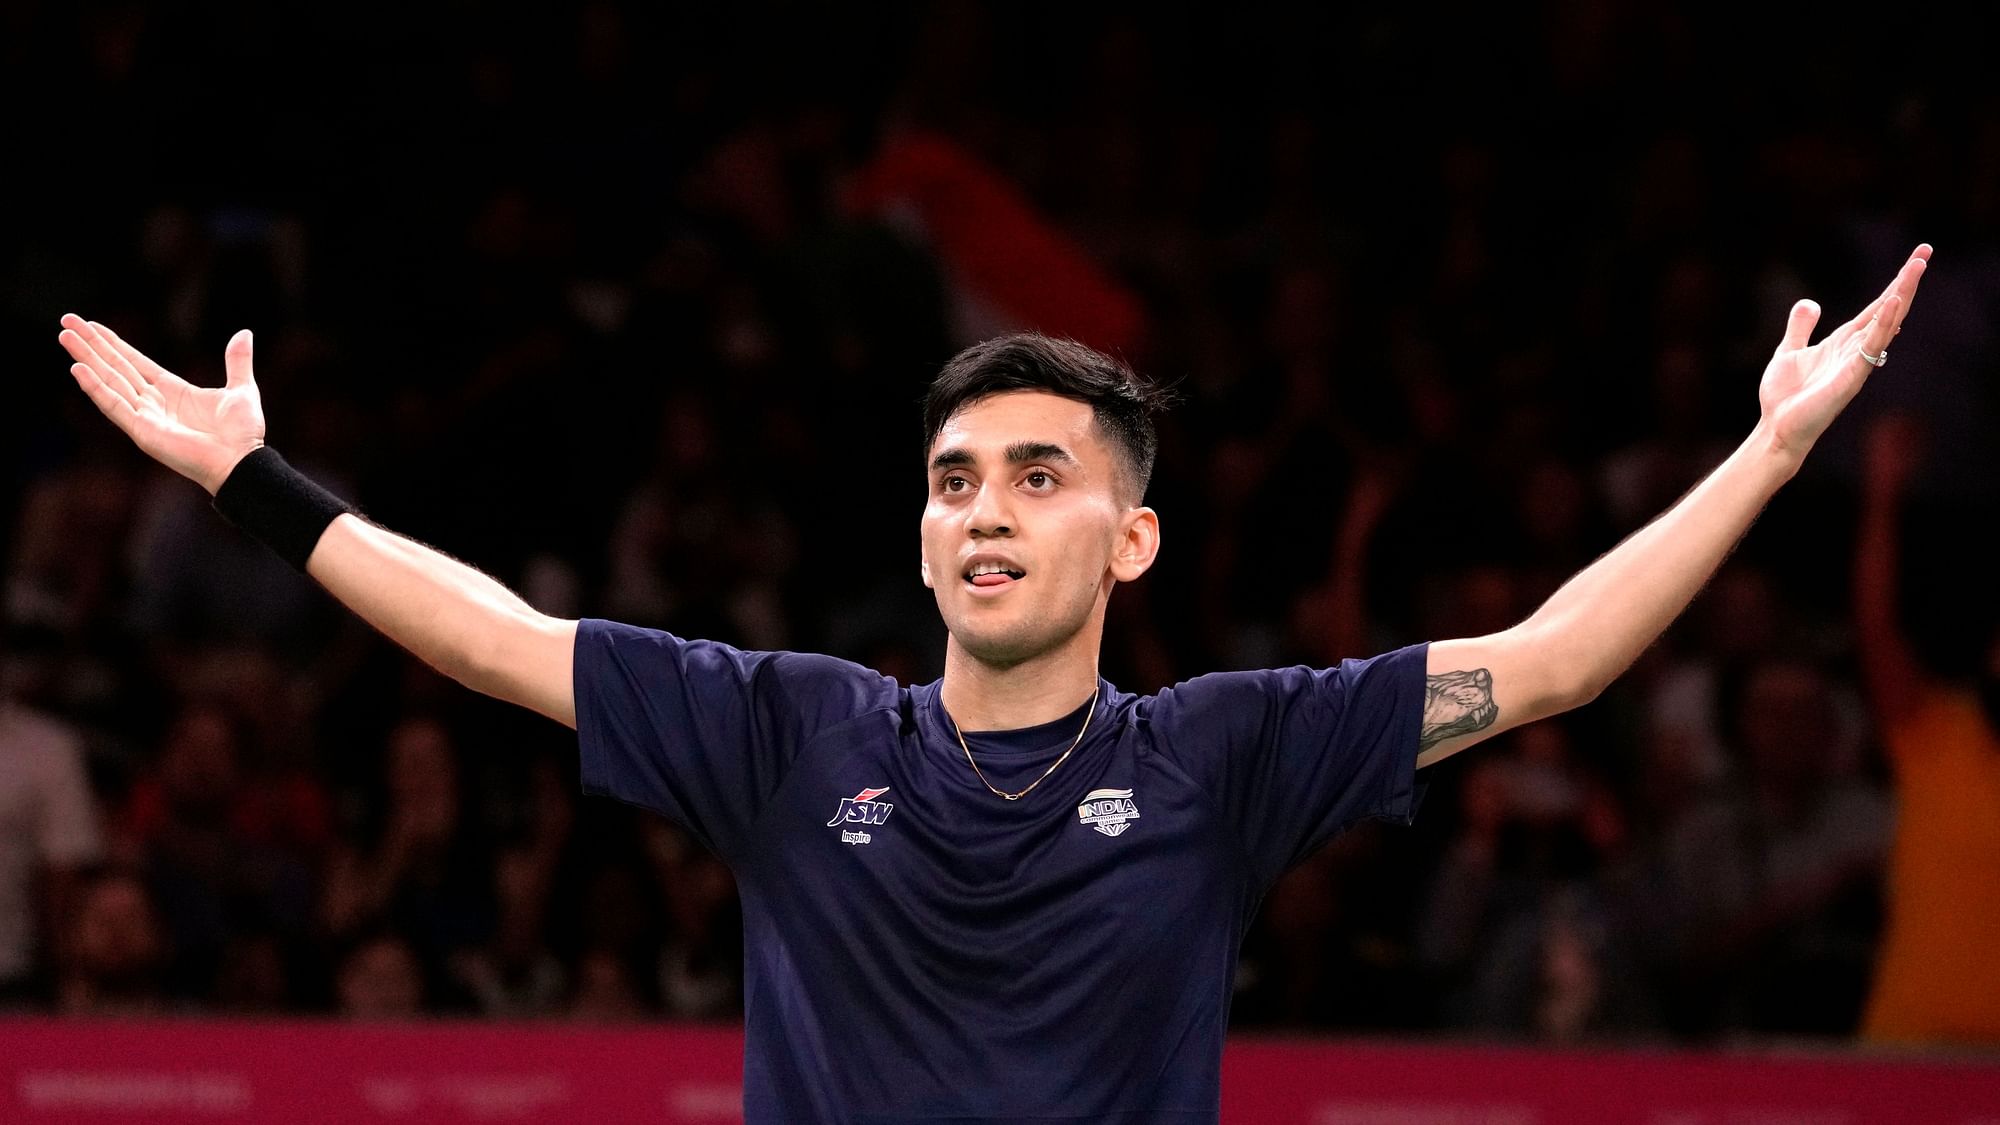 <div class="paragraphs"><p>Lakshya Sen of India celebrates after winning against Jia Heng Teh of Singapore during the men's singles semi-final badminton match at the 2022 Commonwealth Games in Birmingham.</p></div>